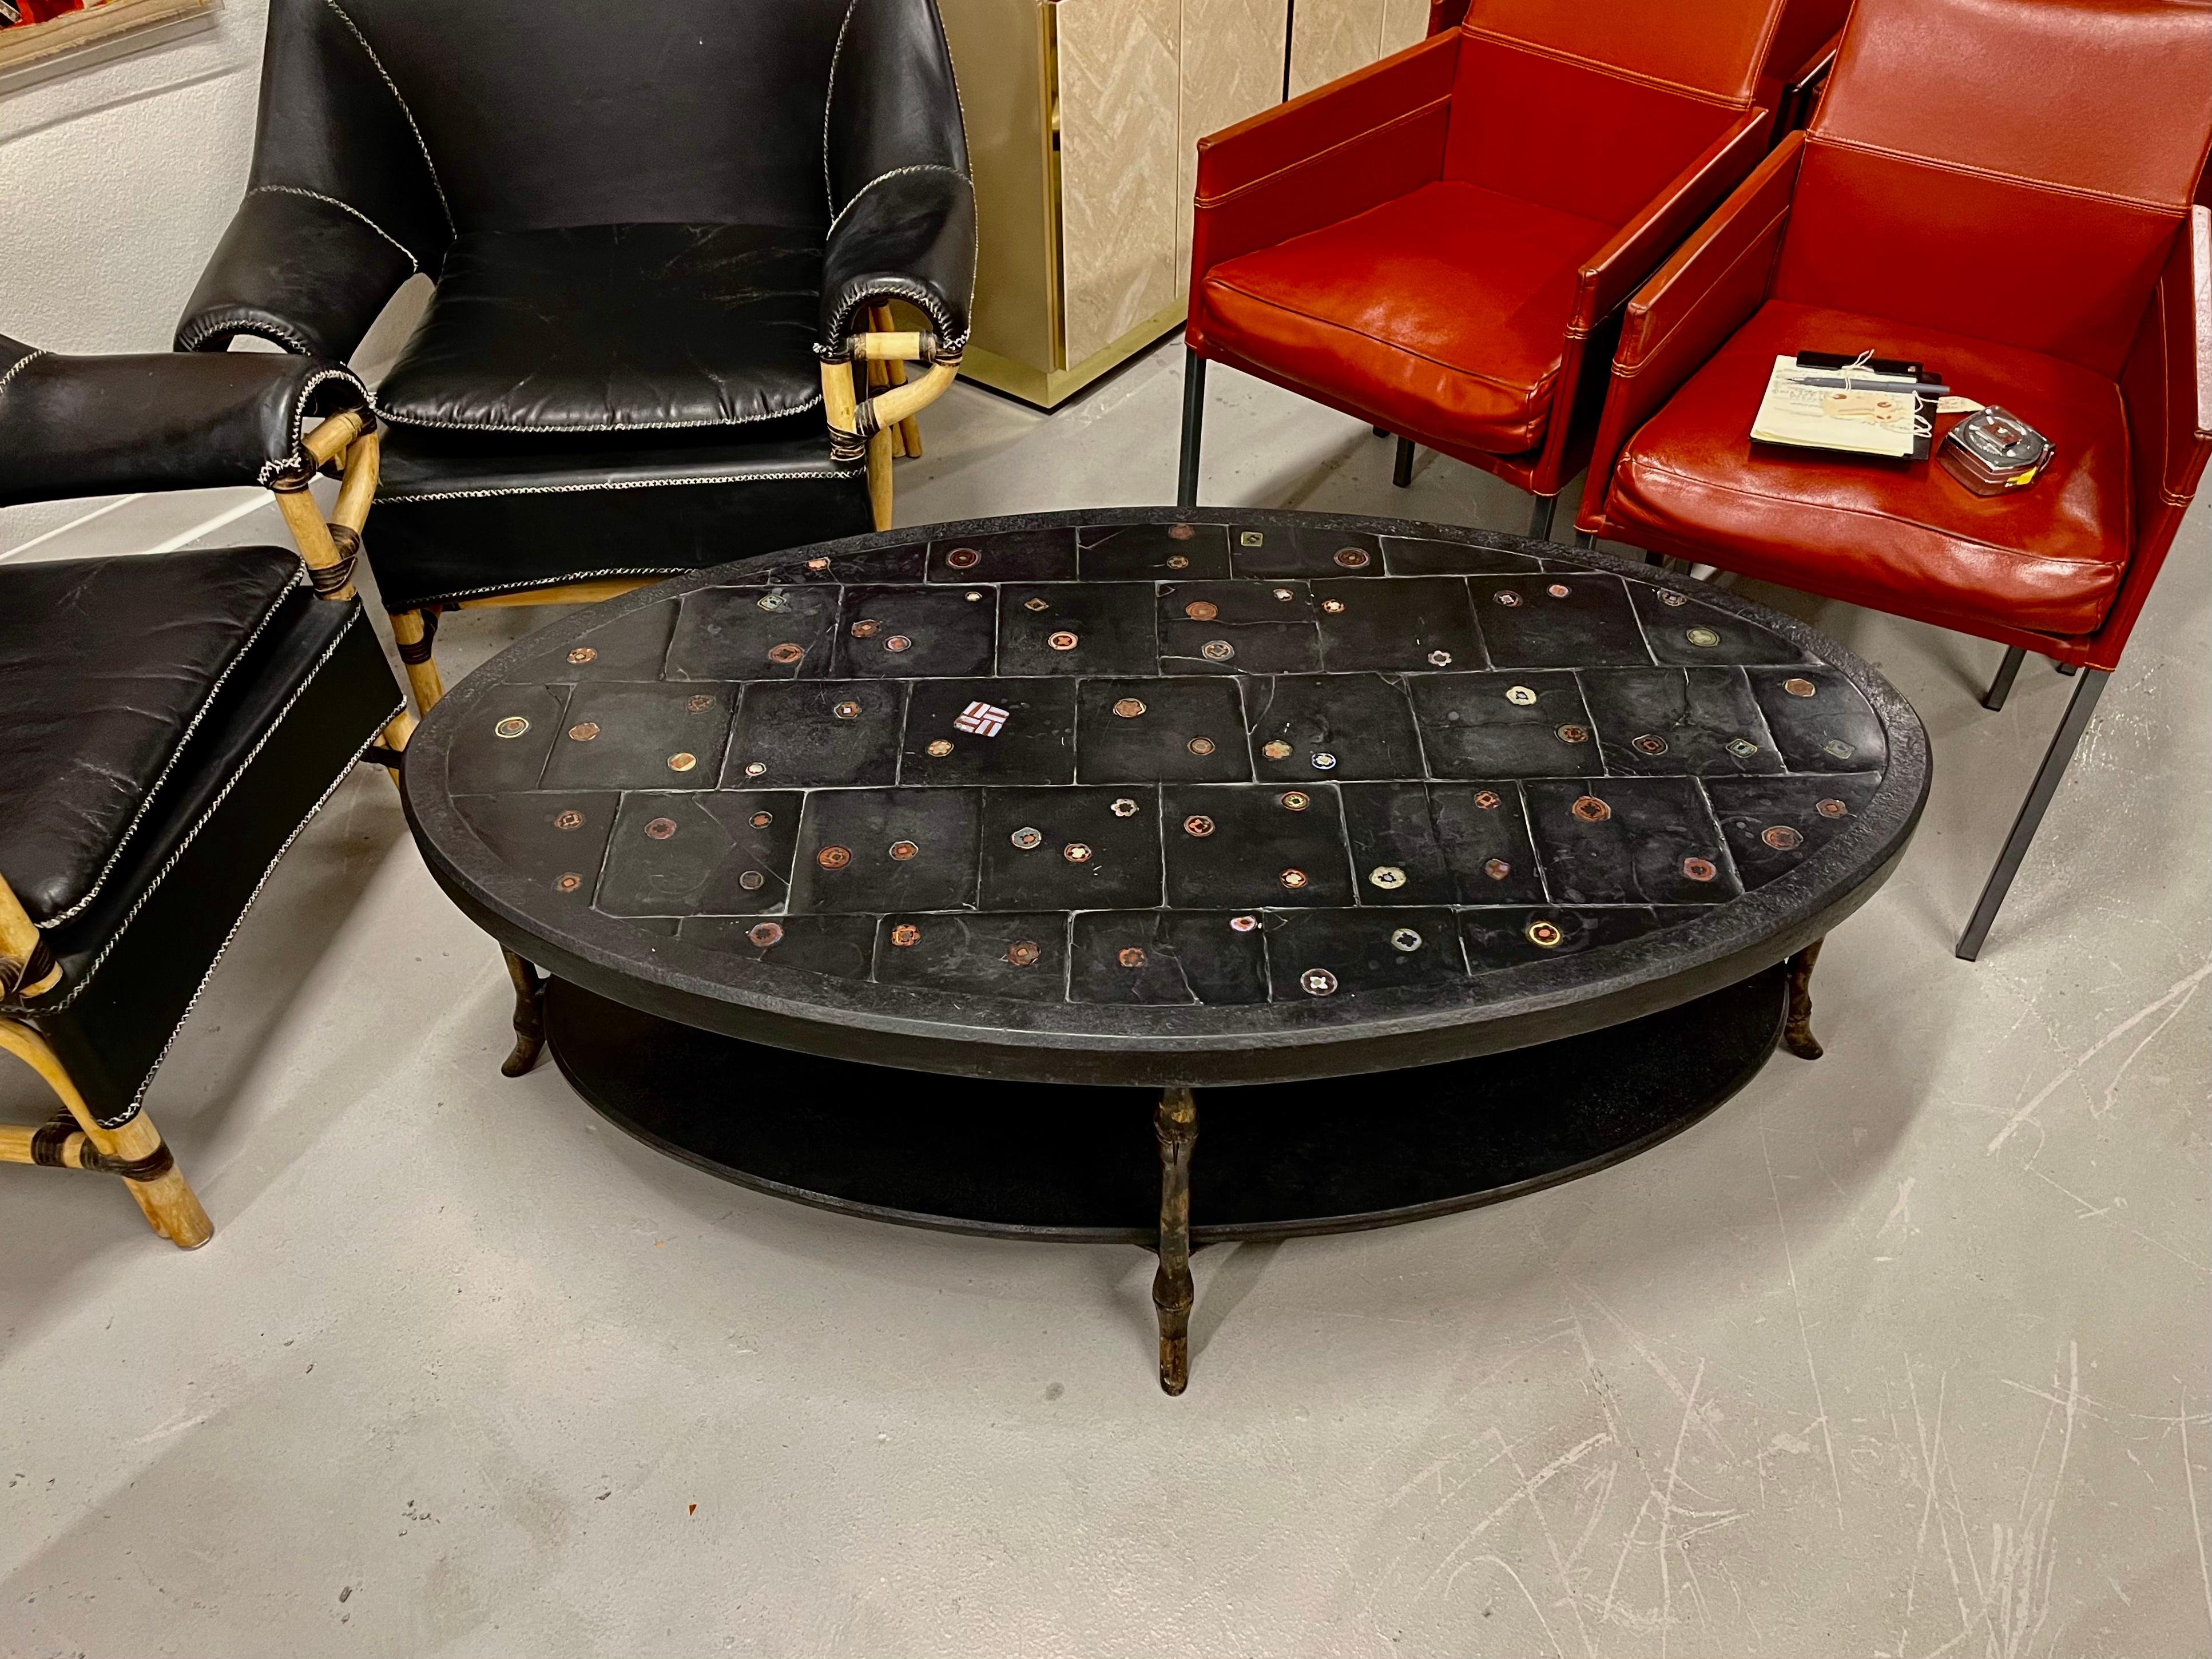 A beautiful slate table with millefiore art glass inlaid pieces. Likely from Ironies. Purchased in the 1990’s. Great oval shape. Two tiers, the slate pieces are removable for transport. Faux bamboo legs with a touch of gilt. The top of the table has